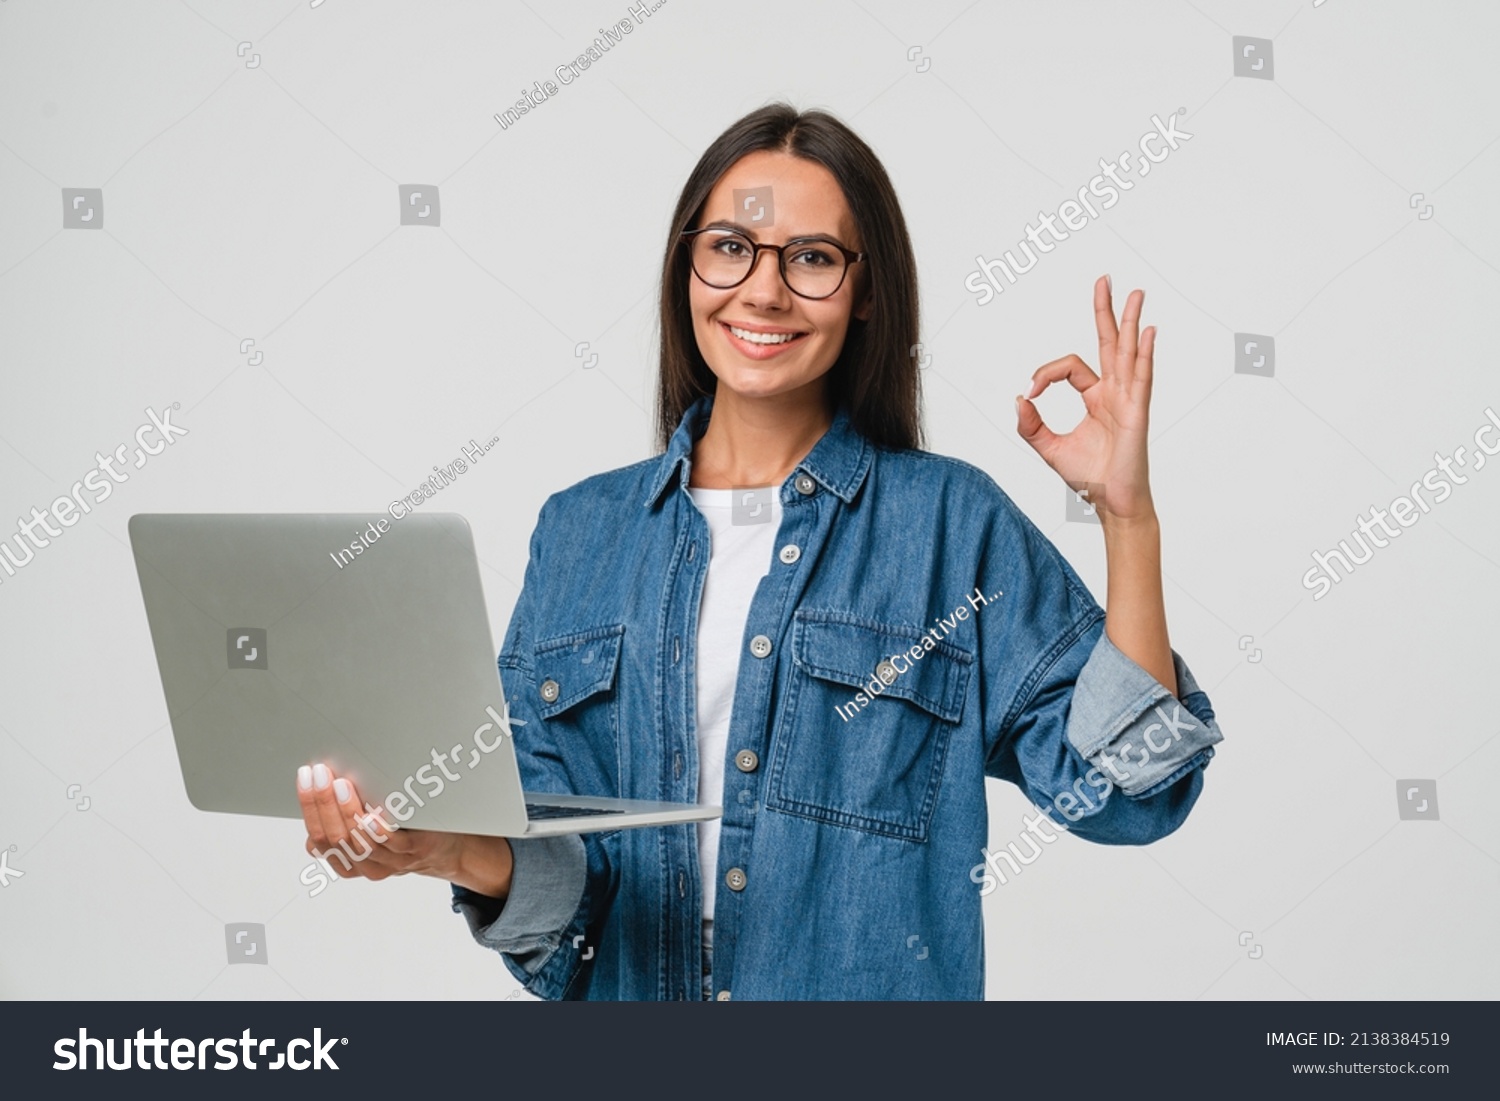 Young smiling caucasian student freelancer woman using laptop for remote work, e-learning at university college, e-banking, online shopping, webinars showing okay gesture isolated in white background #2138384519